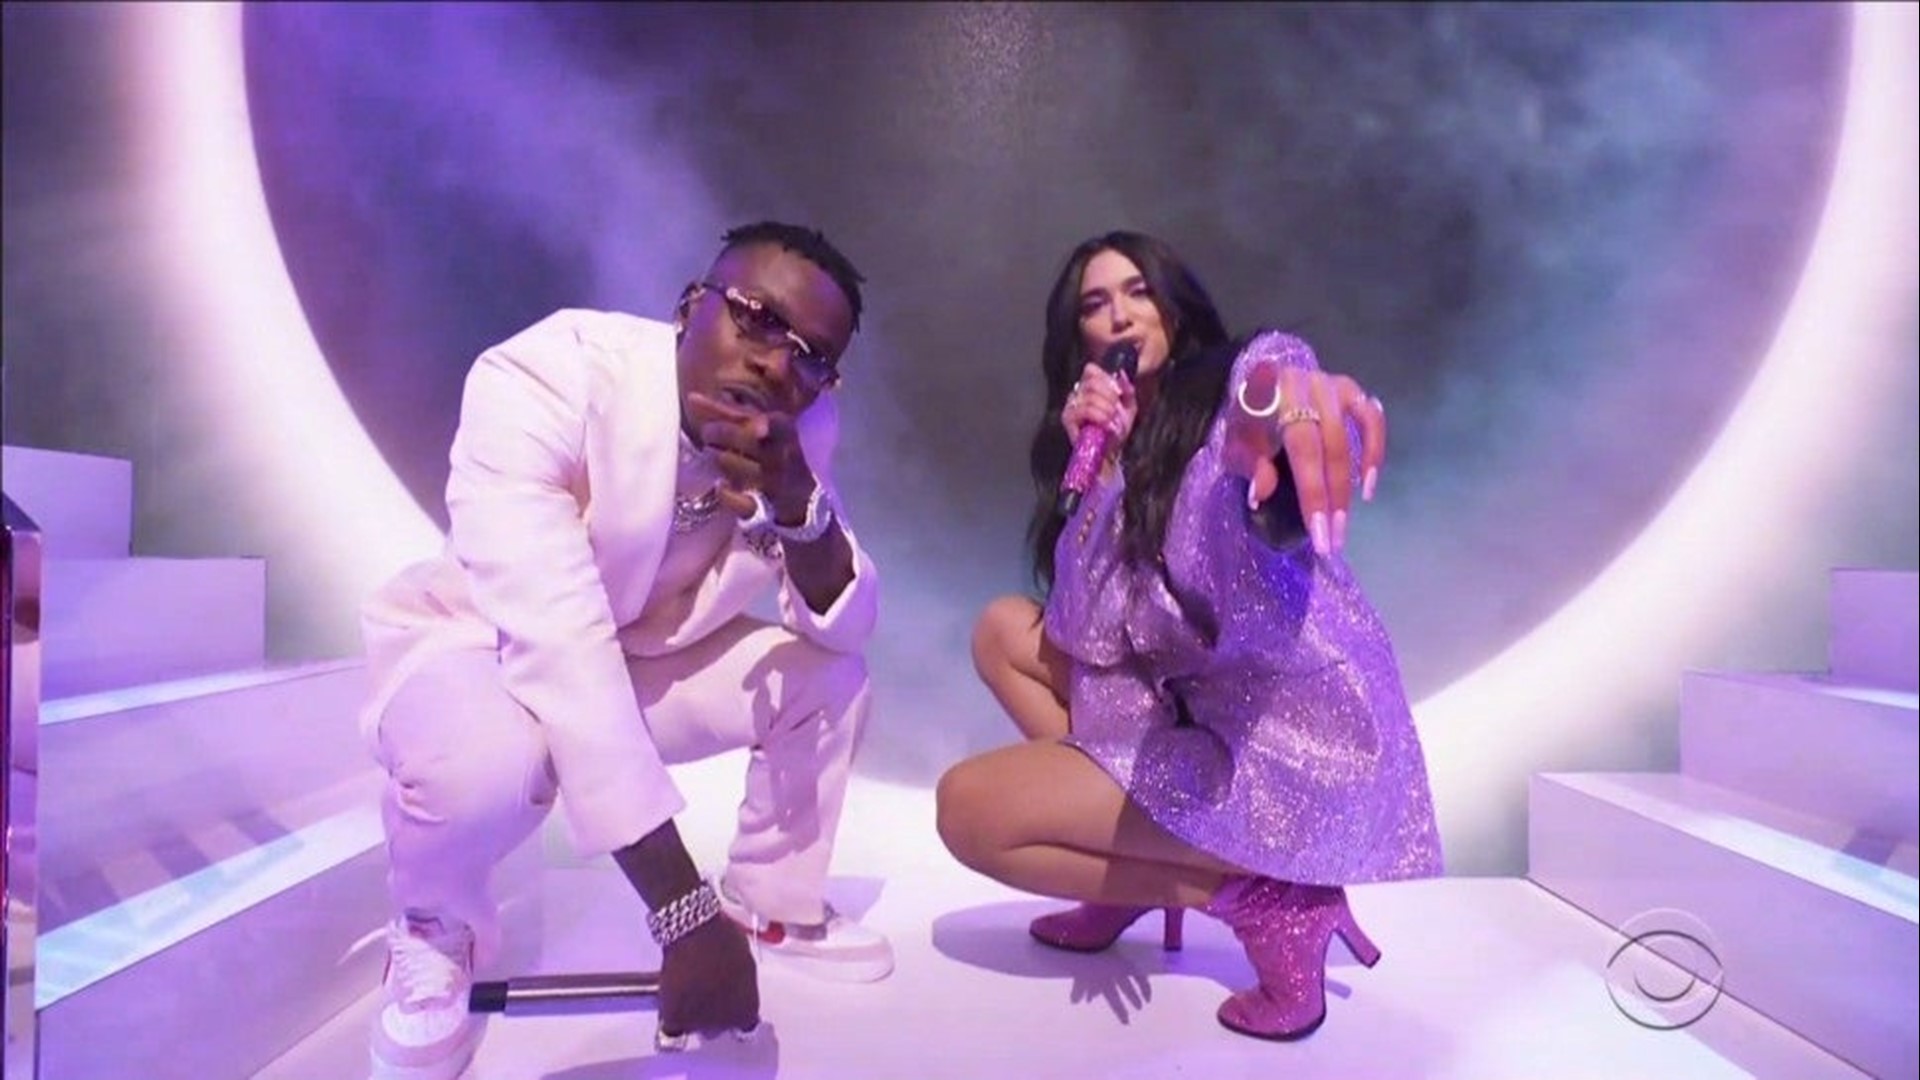 Dua Lipa Sparkles With Levitating Performance Featuring Dababy At